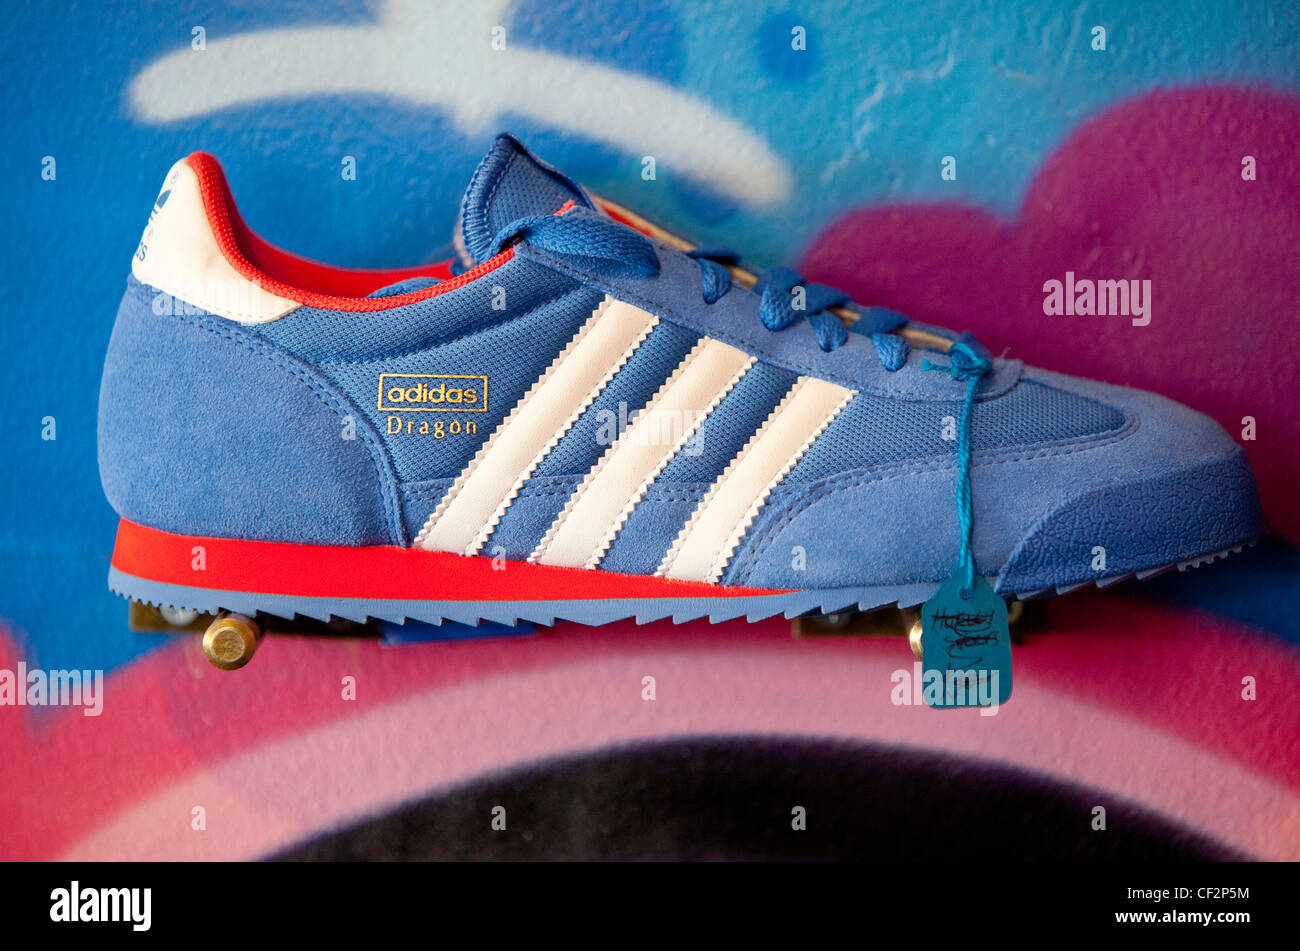 Adidas trainer in display for sale Stock Photo